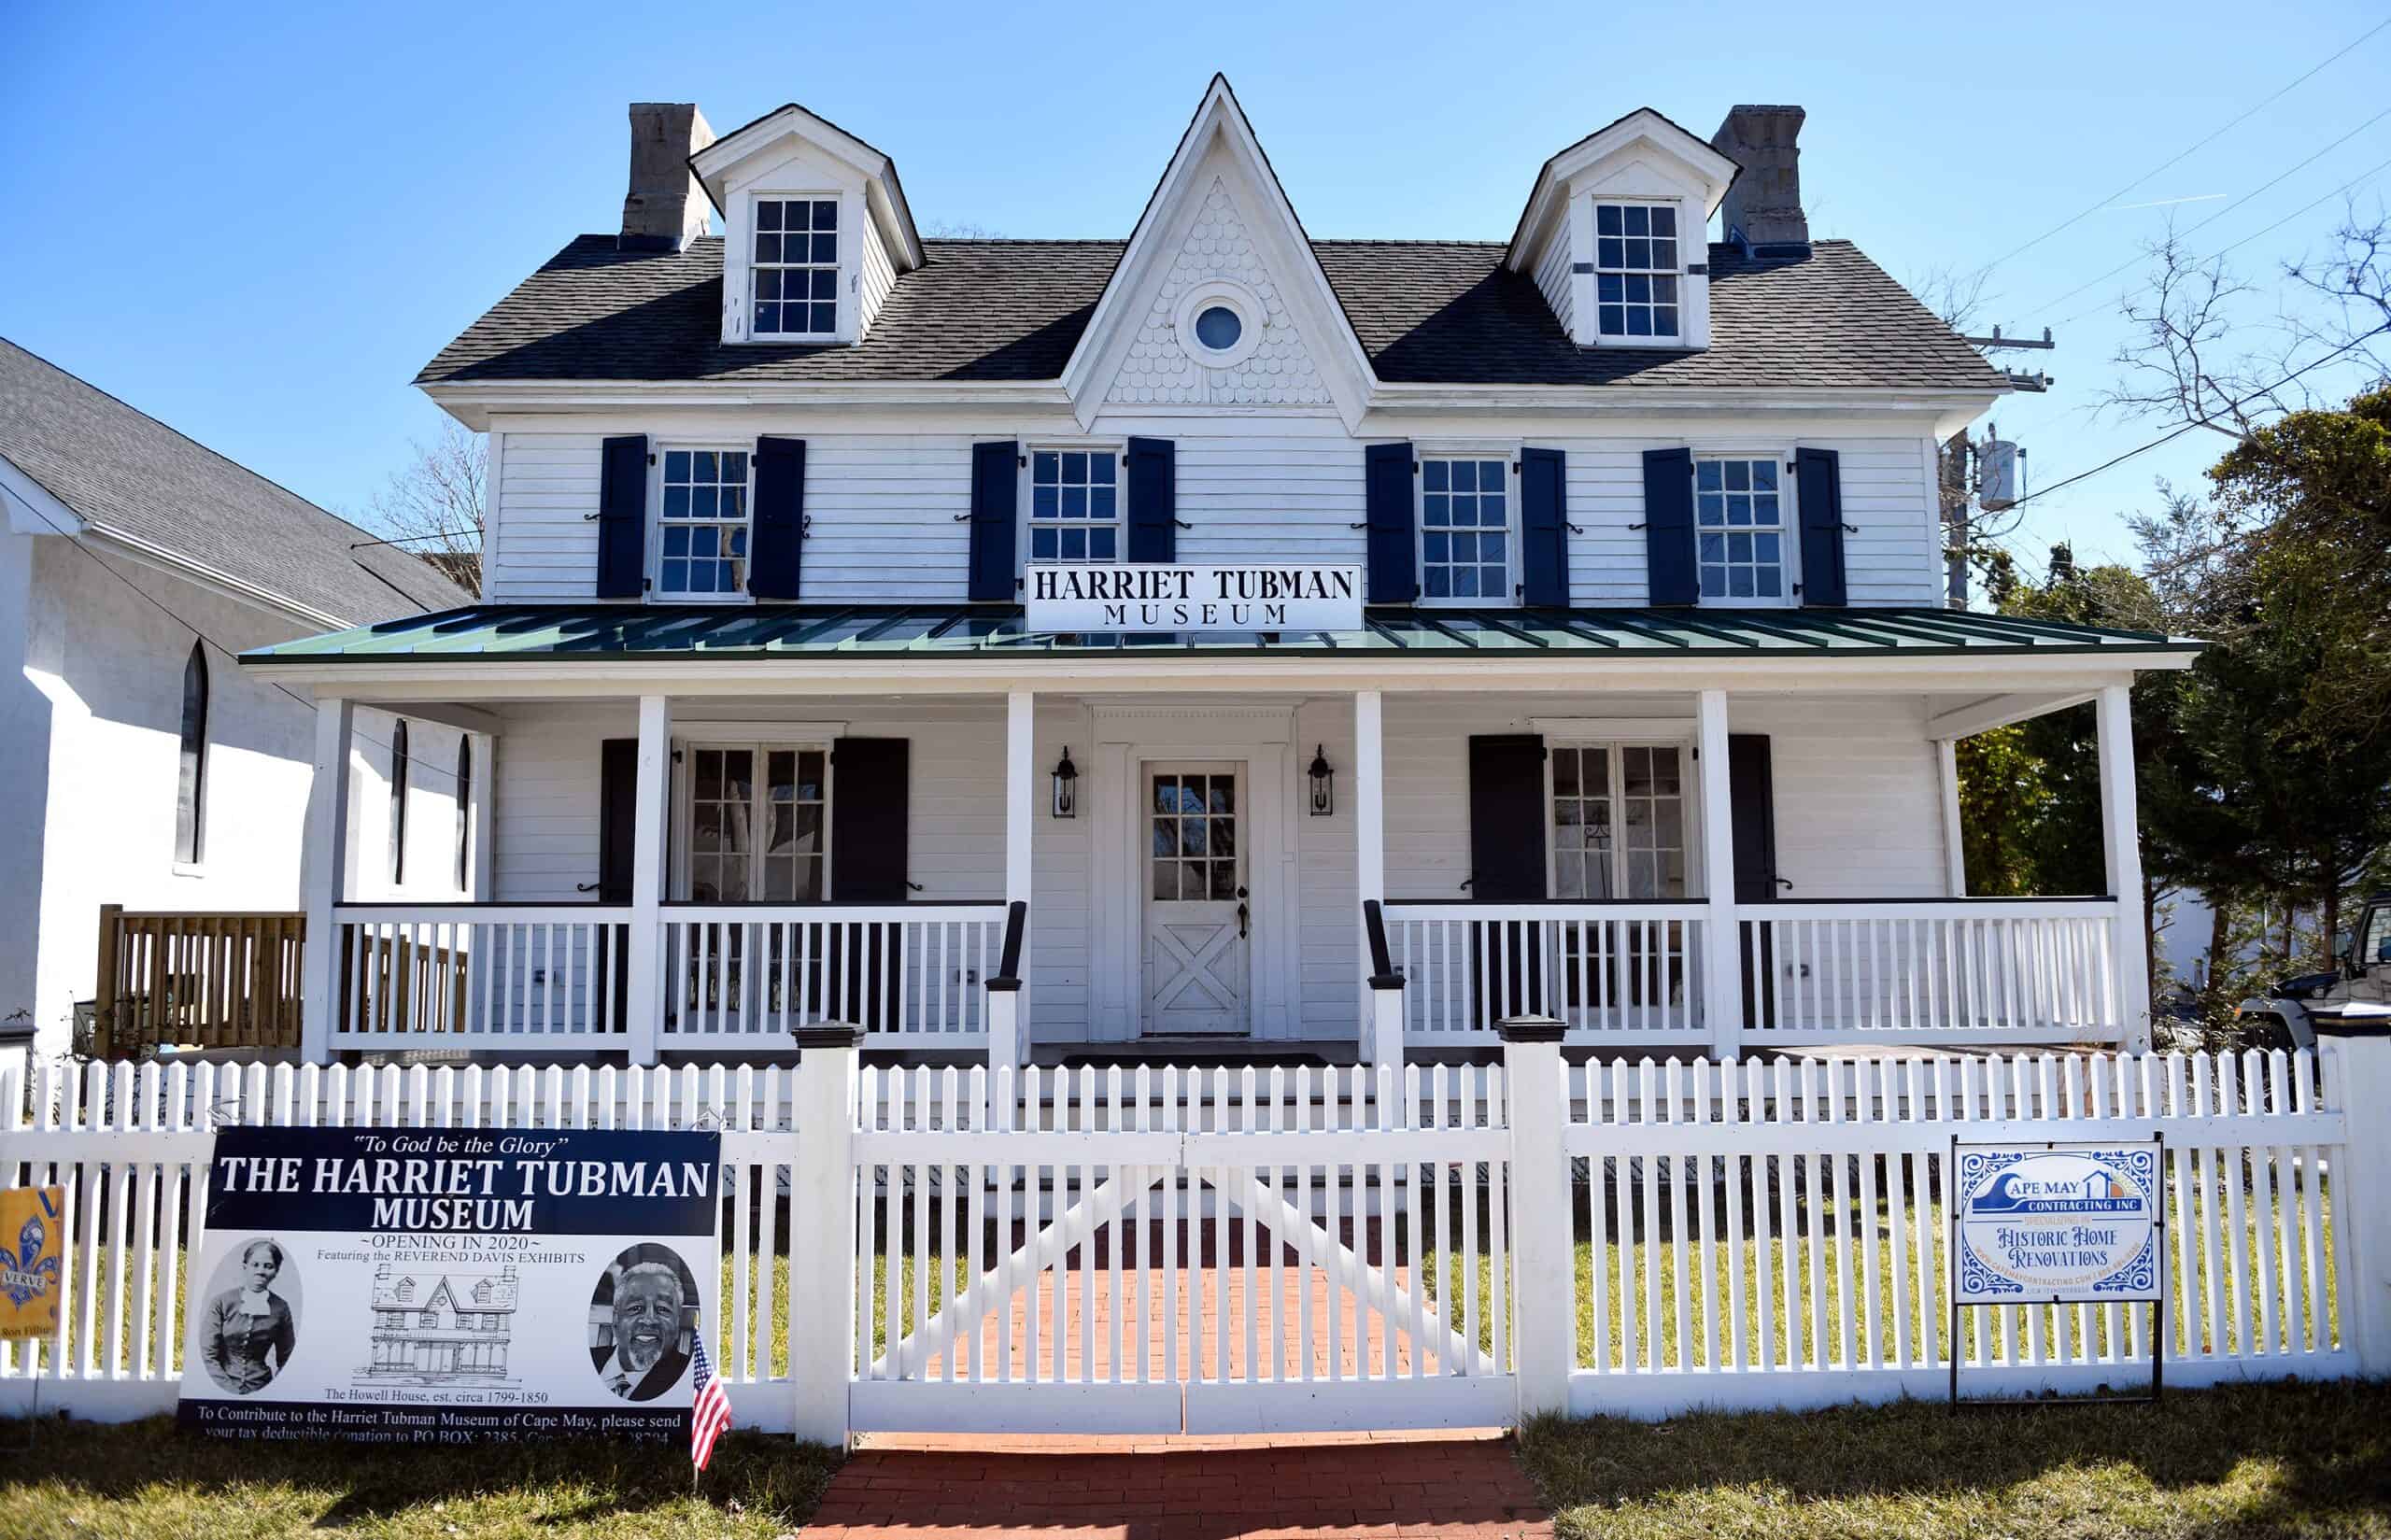 The Harriet Tubman Museum Is Now Open in Cape May!